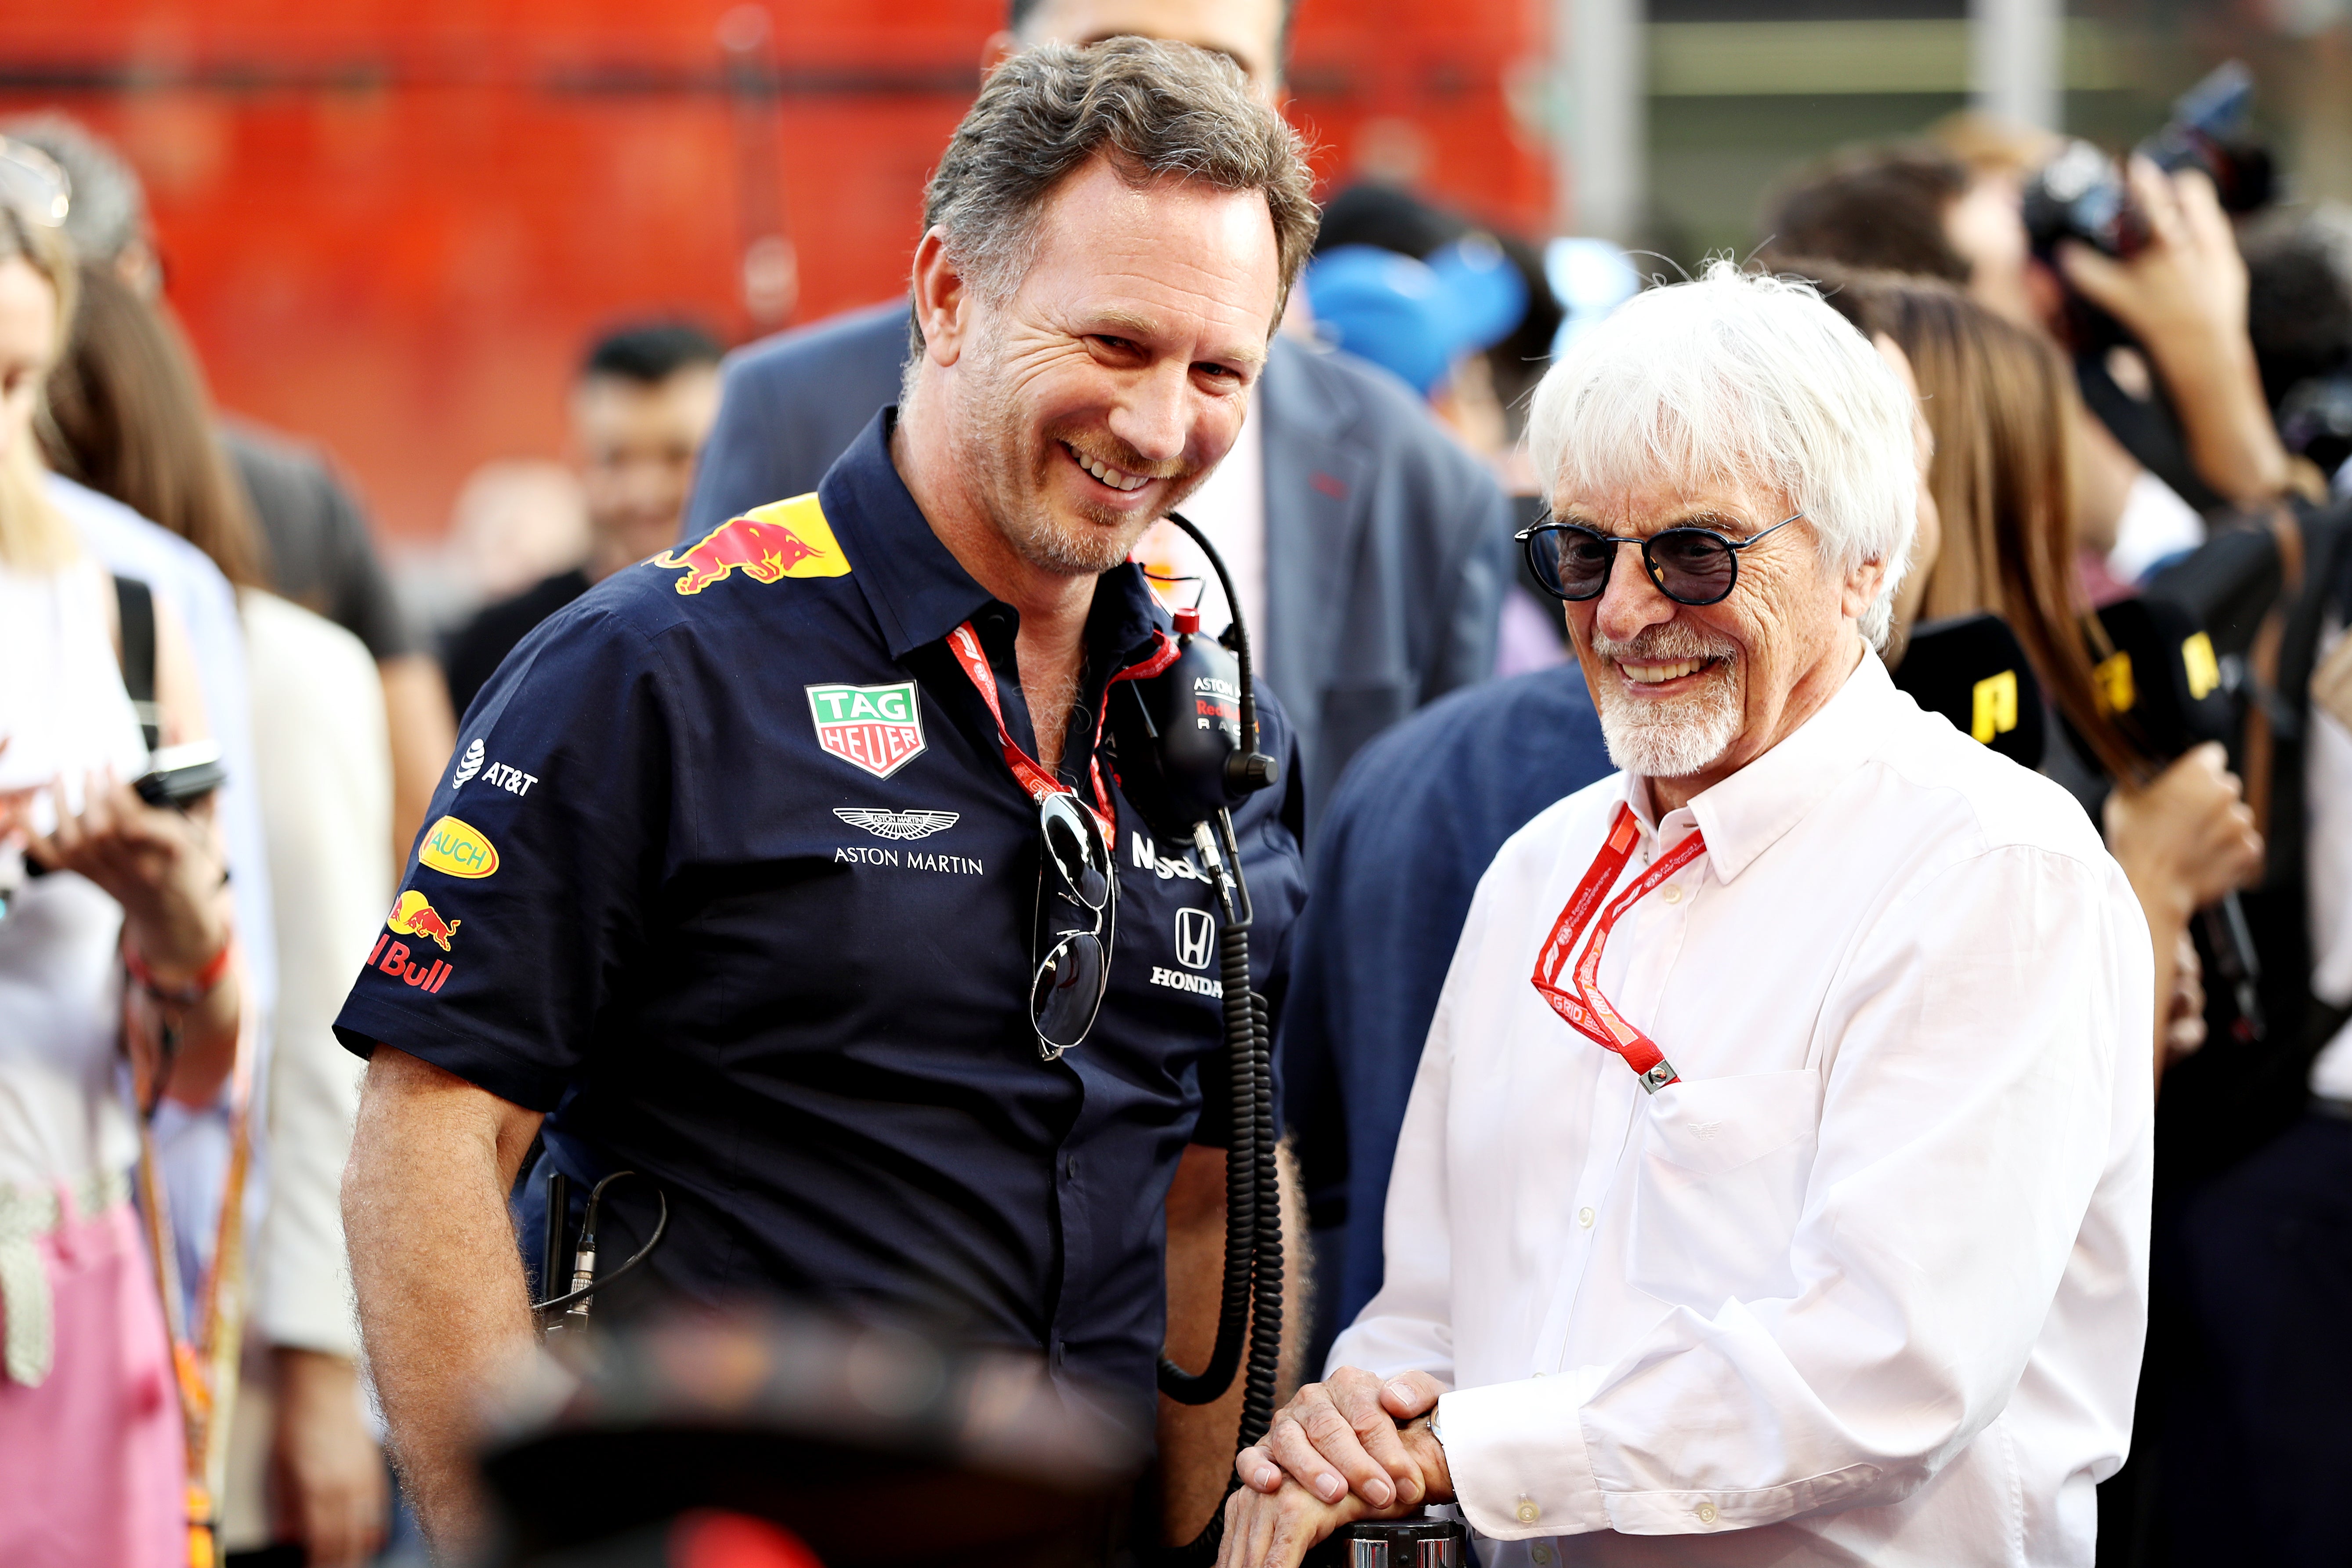 Christian Horner has been backed to become the next CEO of Formula 1 by Bernie Ecclestone